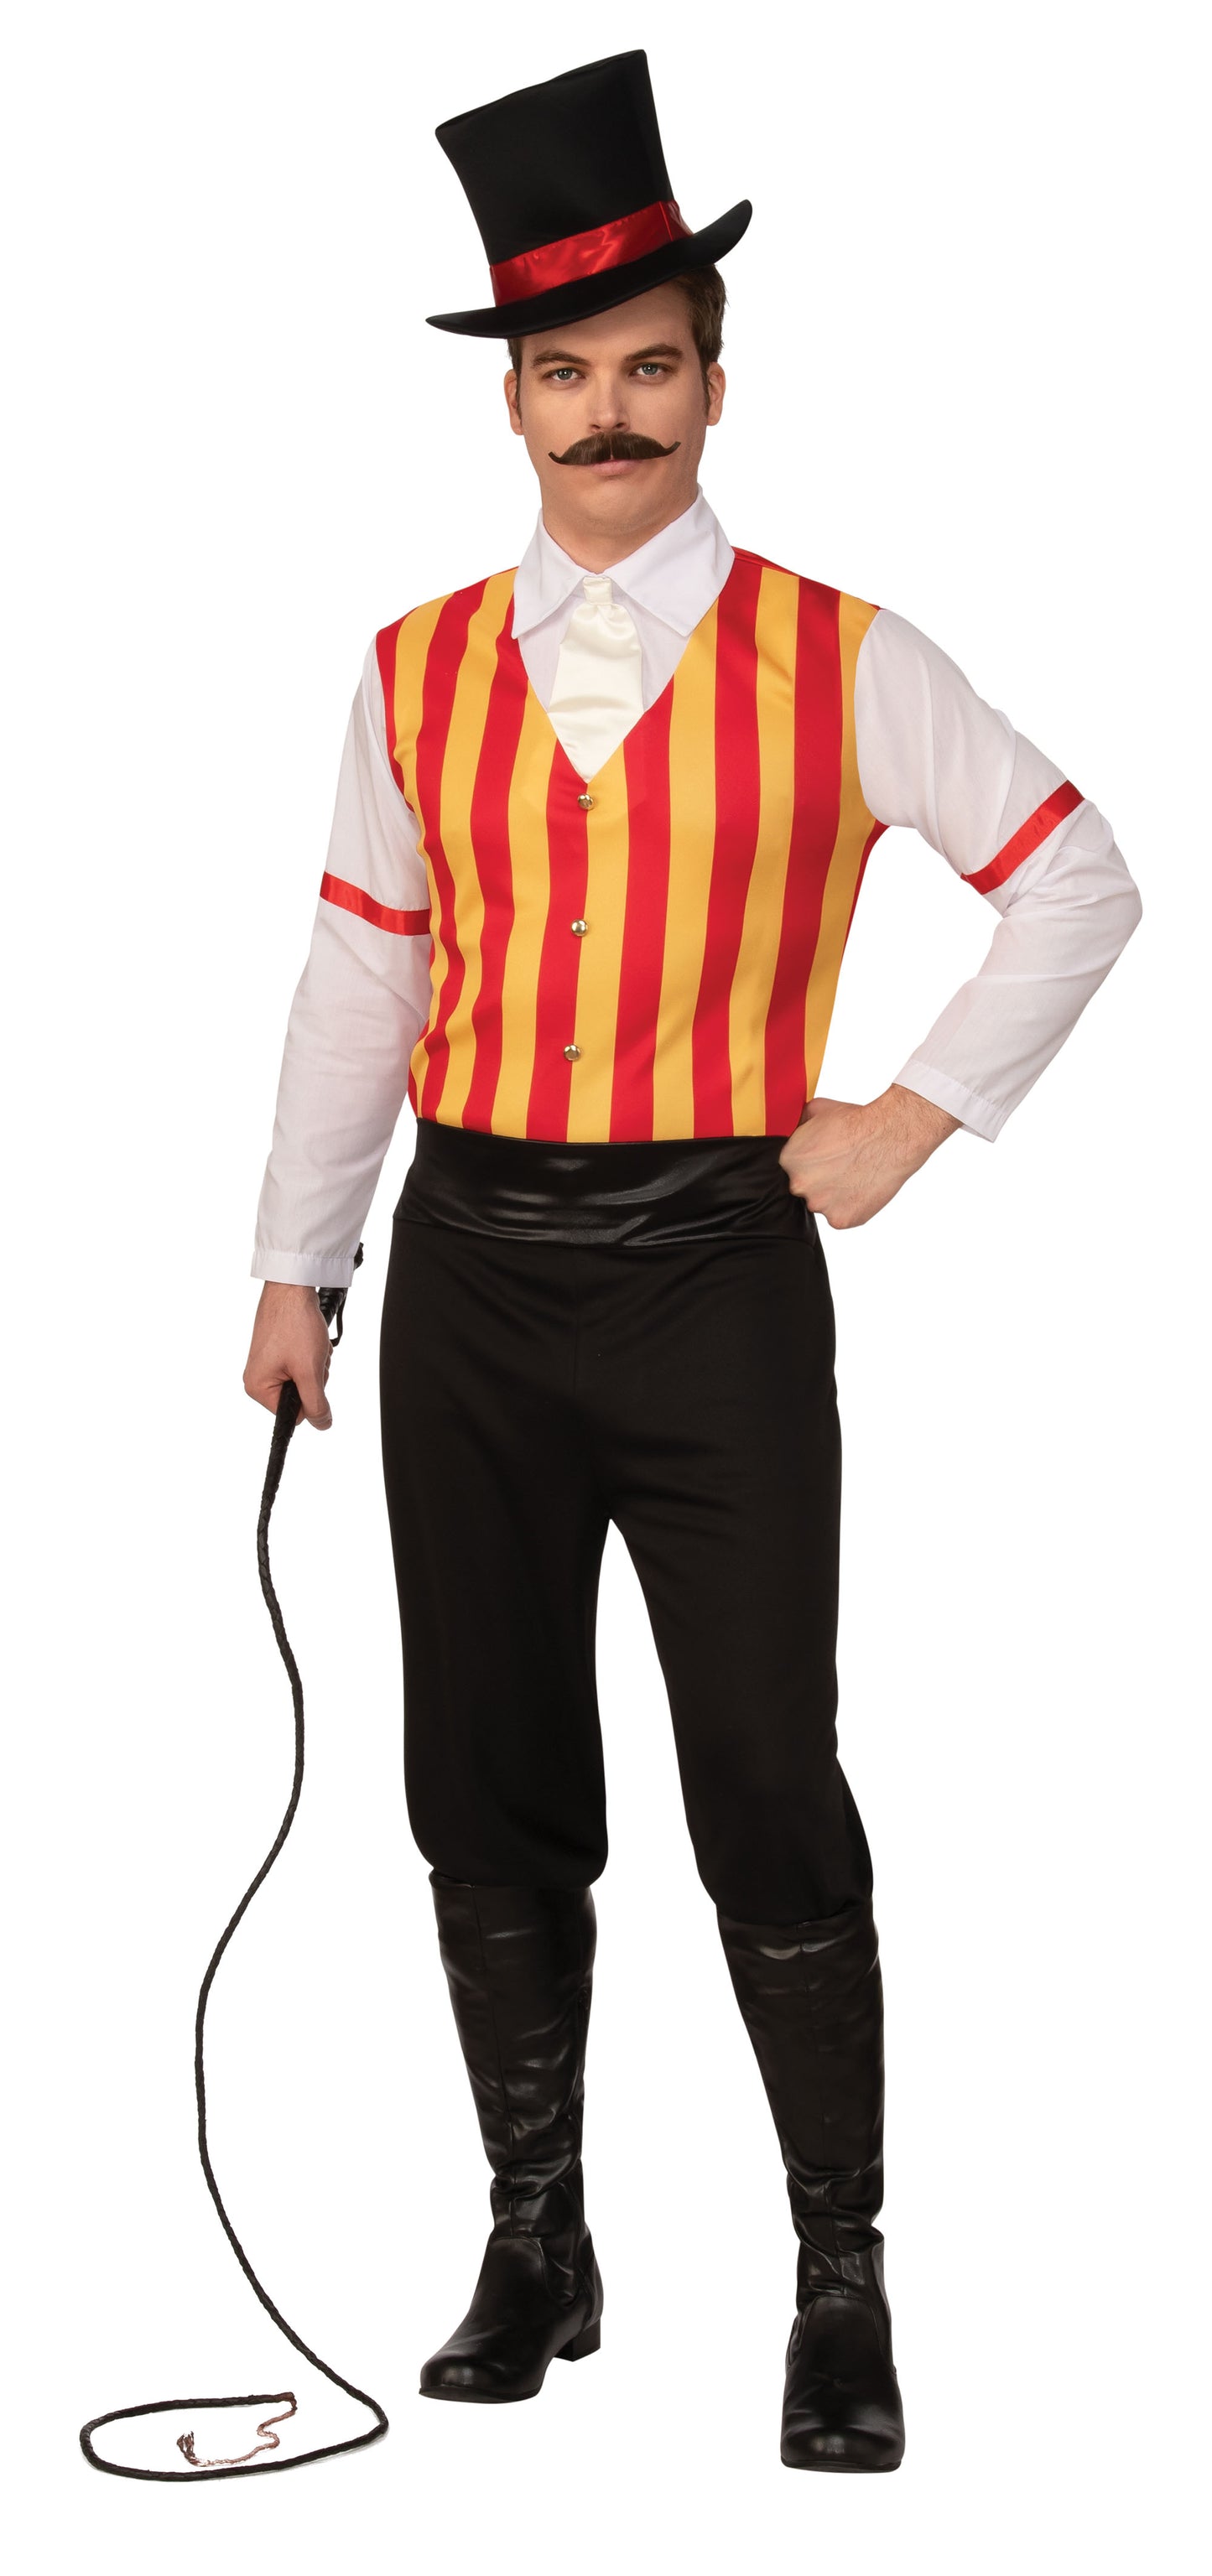 Vintage Ringmaster Costume - on top promoted